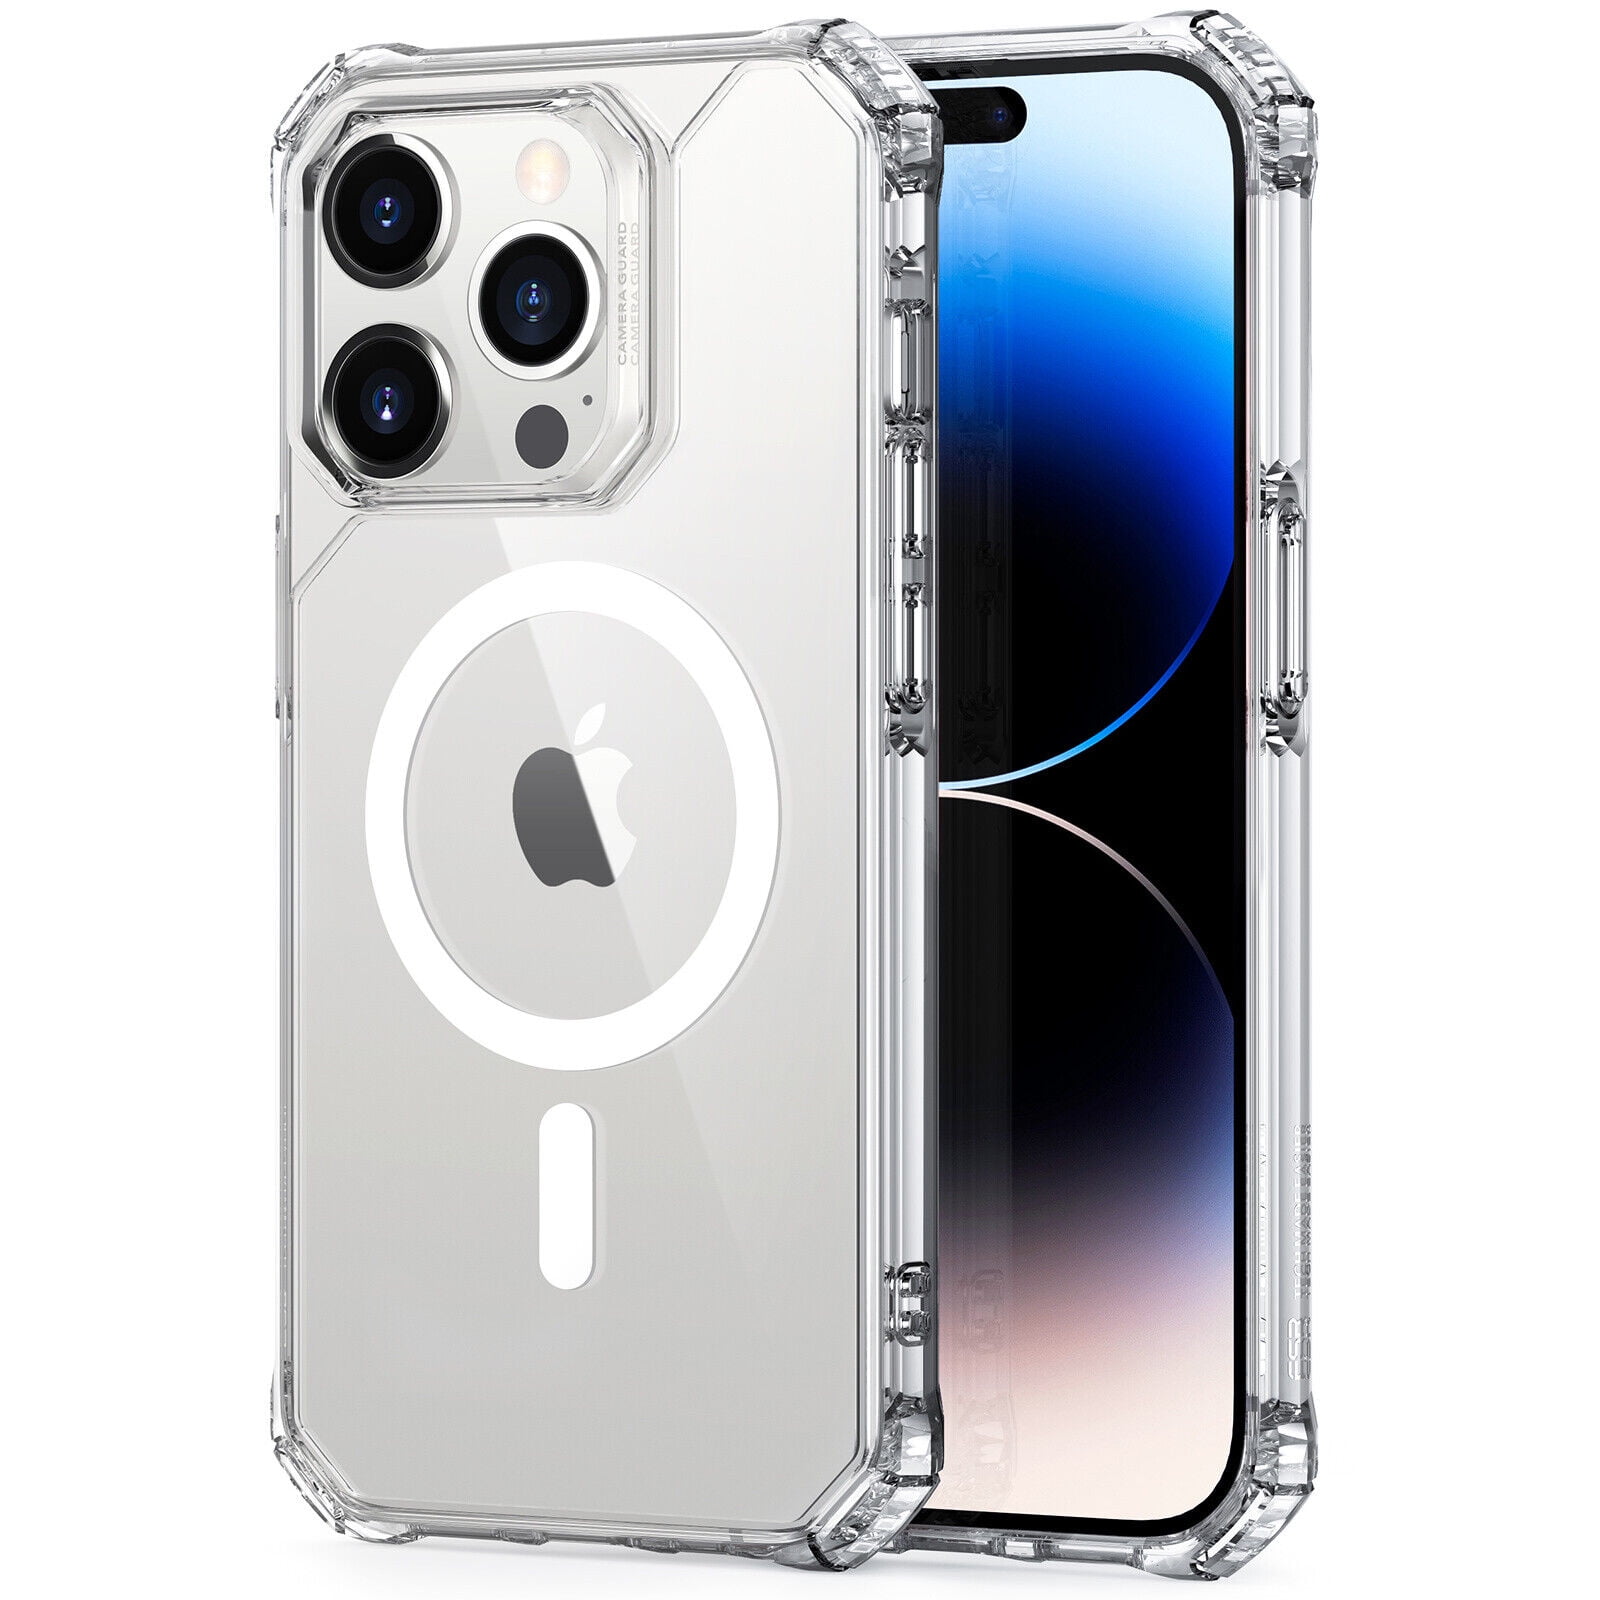 ESR for iPhone 14 Pro Case, Compatible with MagSafe, Shockproof Military-Grade Protection, Yellowing Resistant, Magnetic Phone Case for iPhone 14